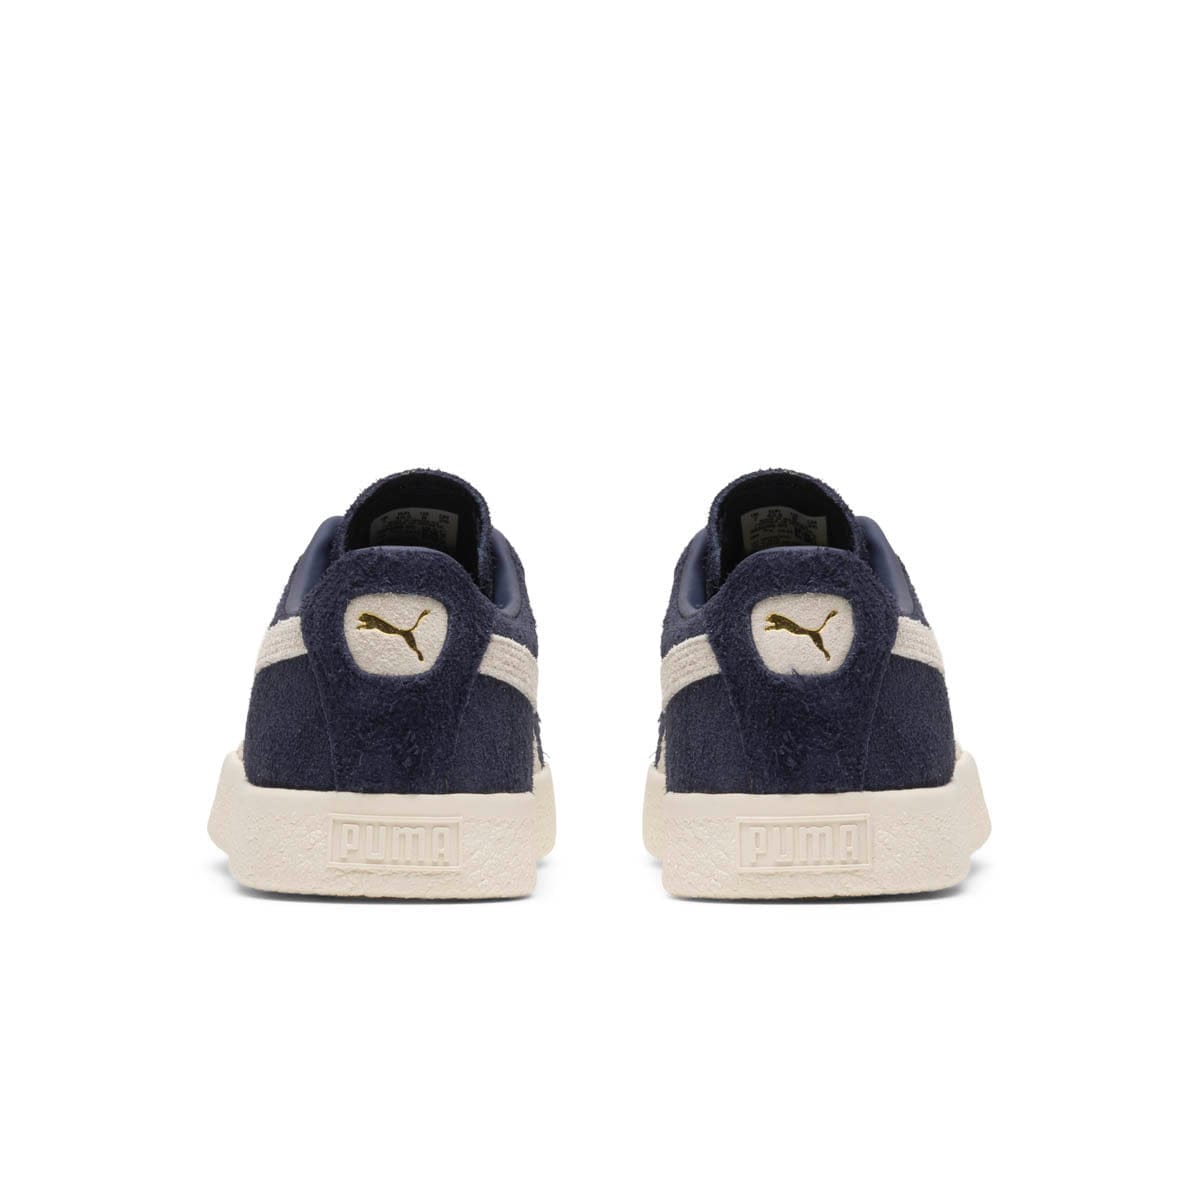 SUEDE VTG HAIRY SUEDE NAVY/FROSTED | Bodega